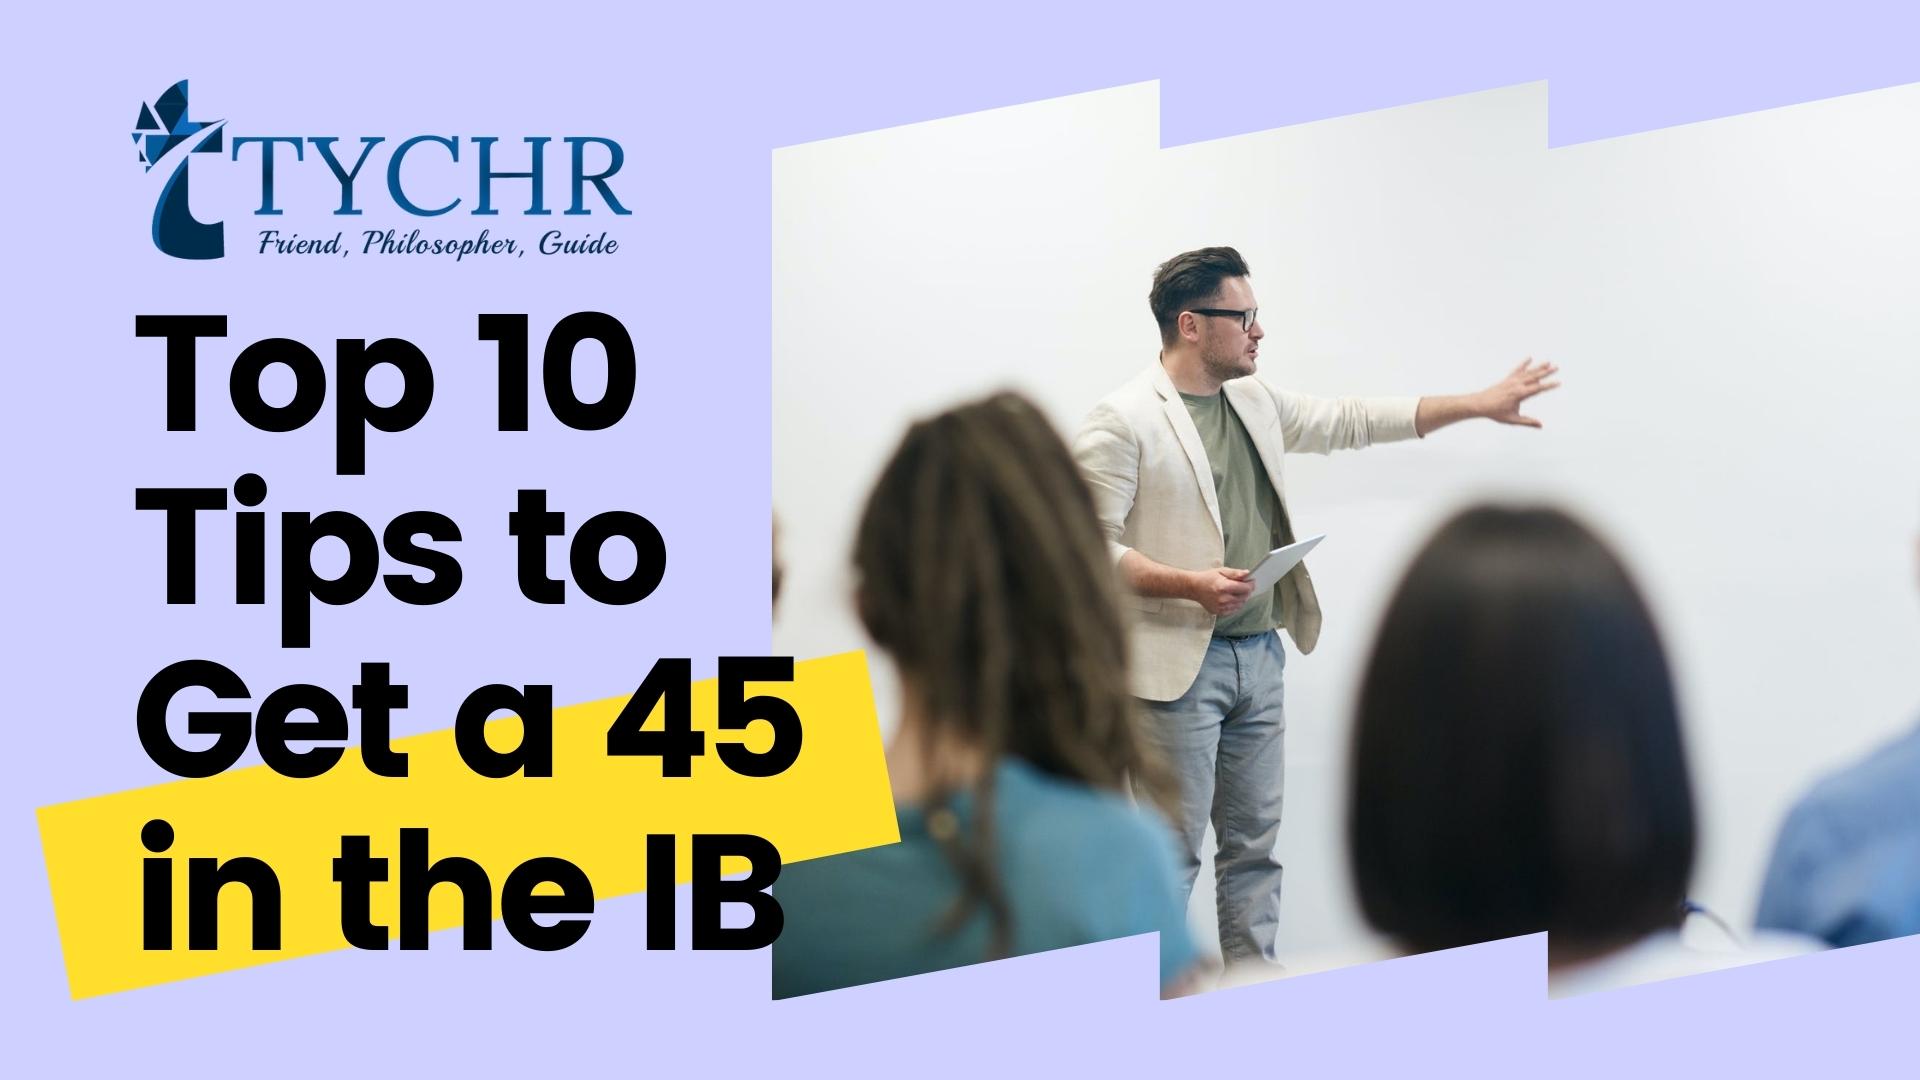 Top 10 Tips to Get a 45 in the IB